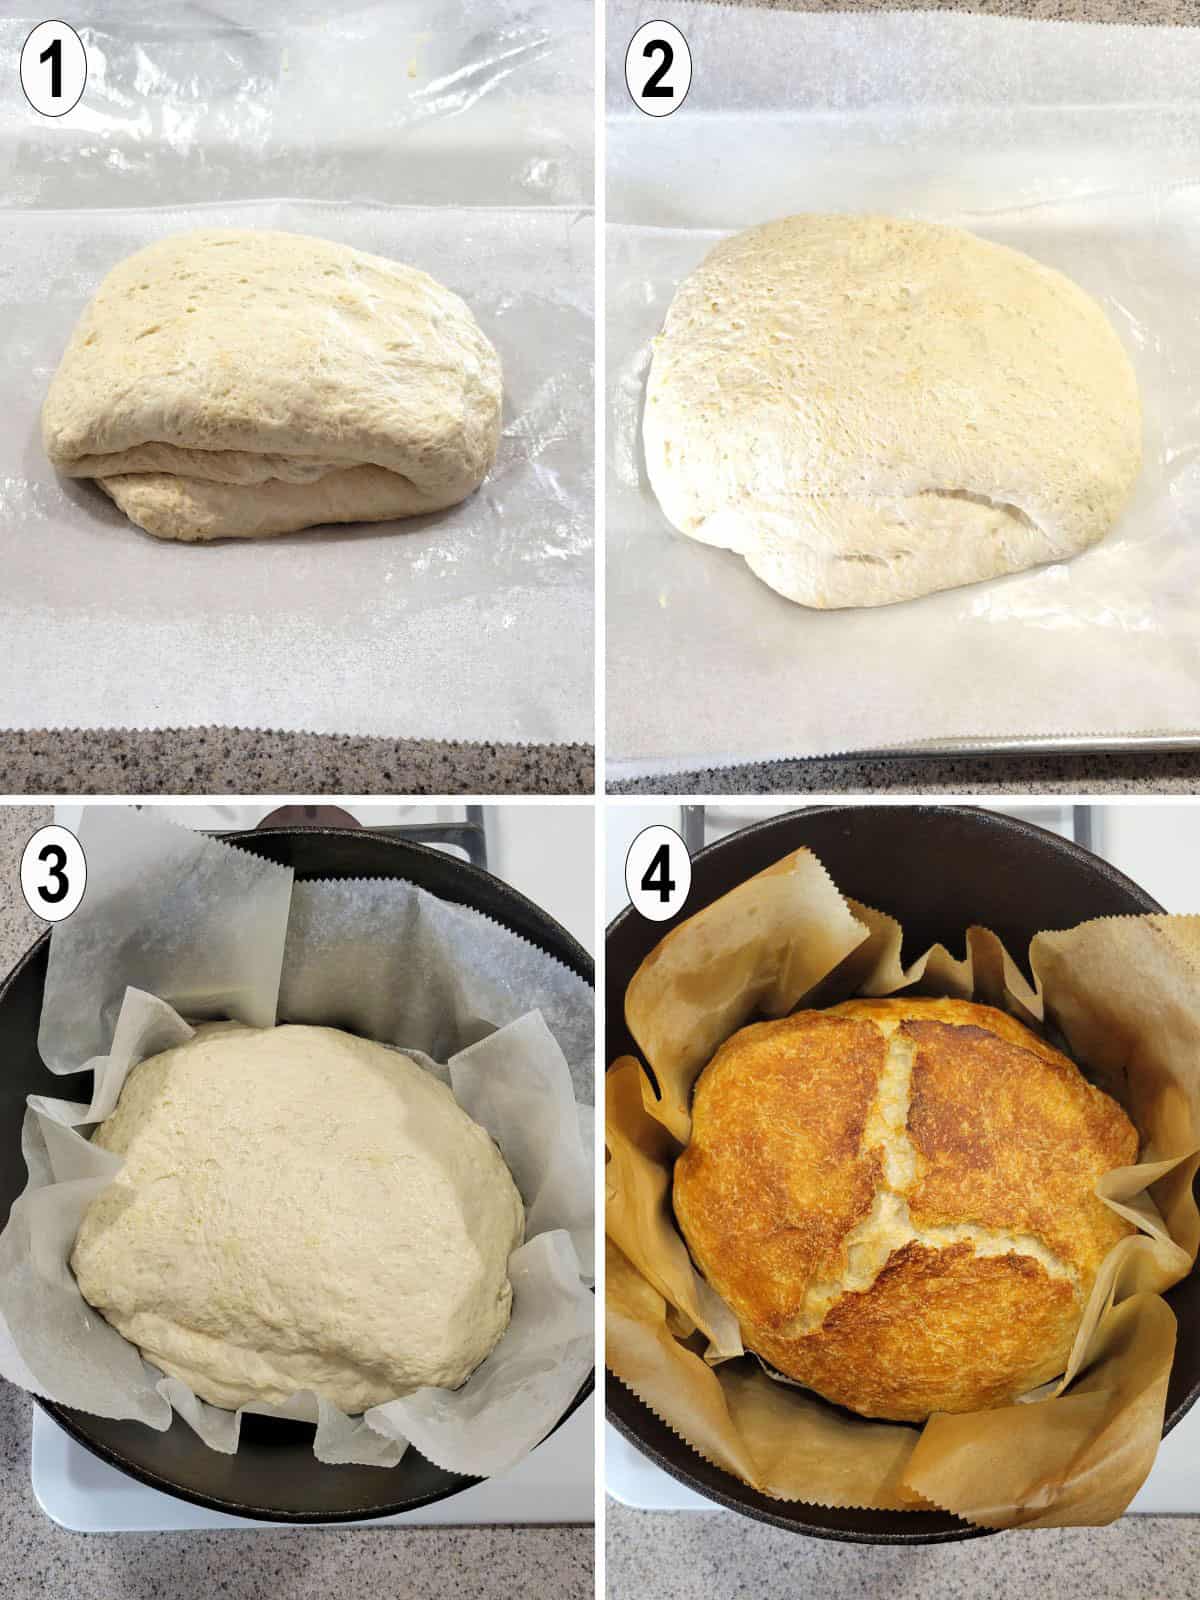 folded dough risen and placed in dutch oven to bake